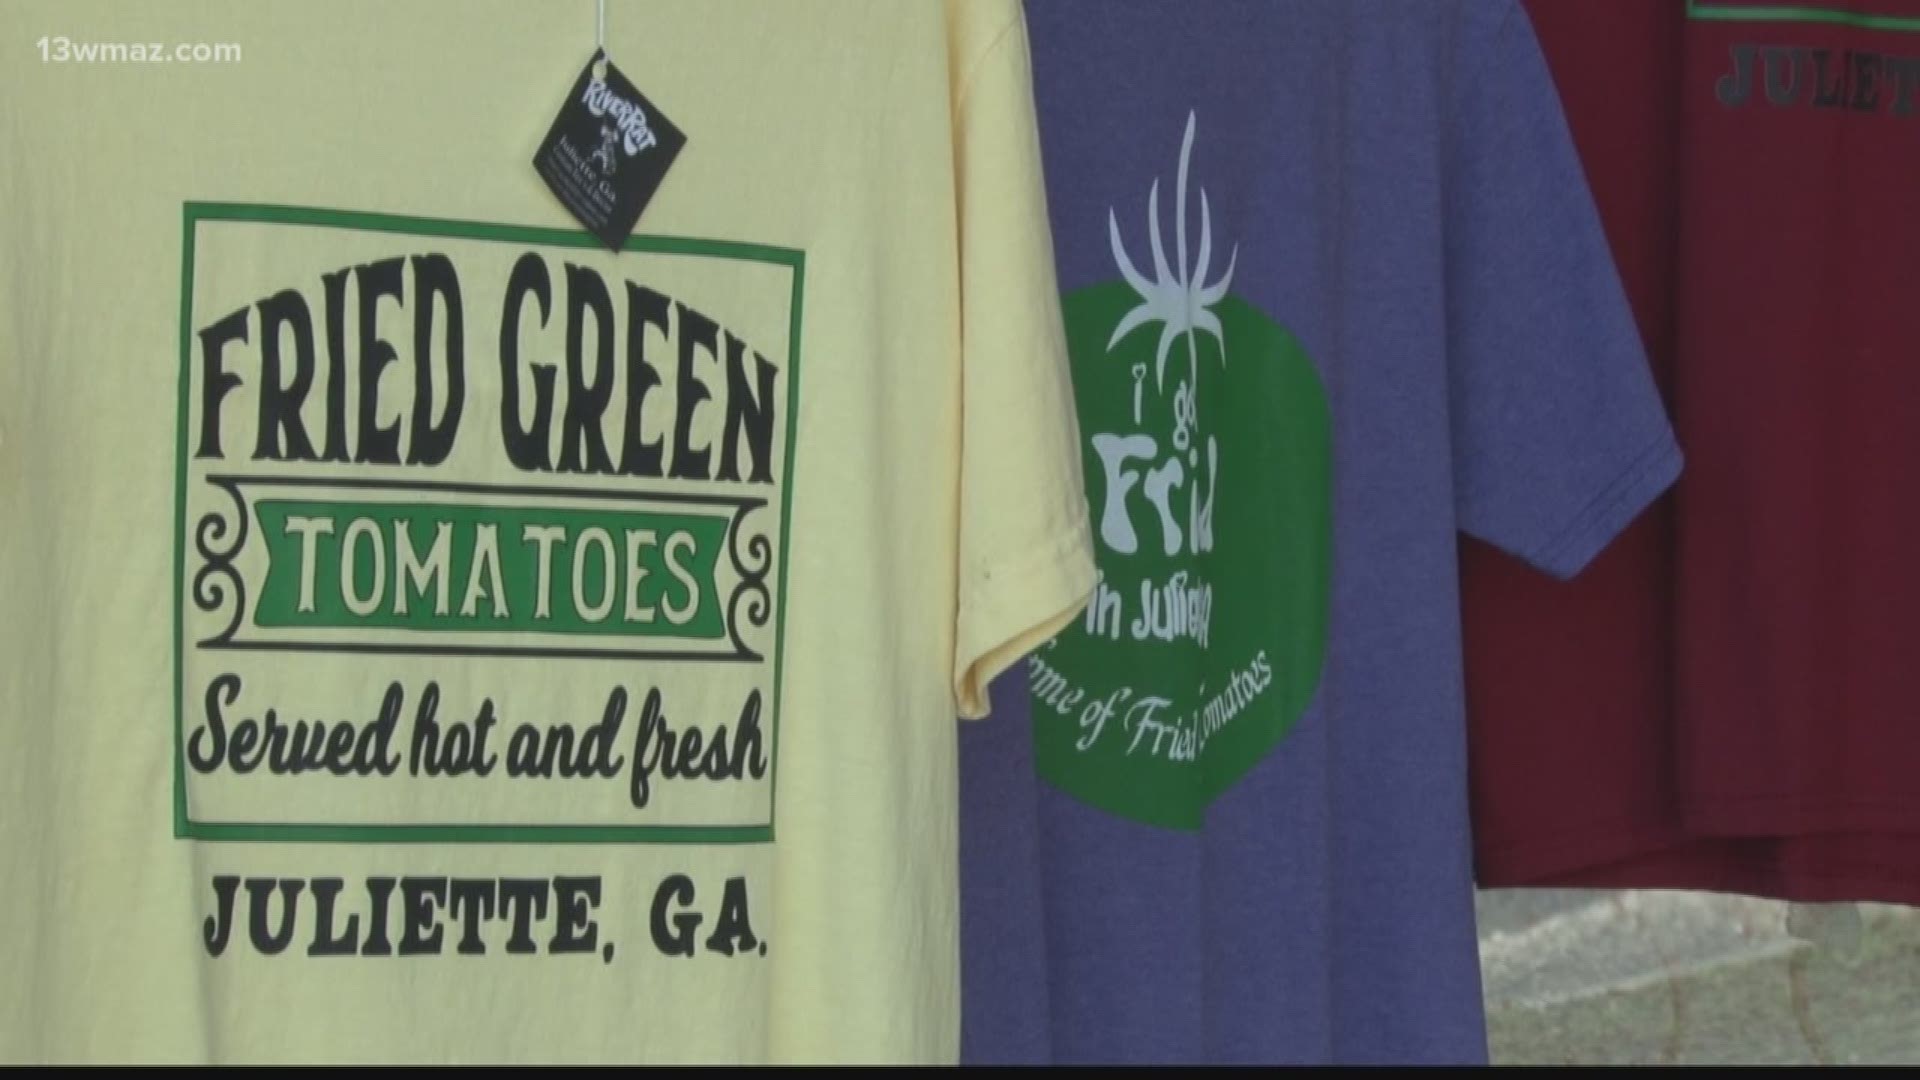 The Fried Green Tomatoes Festival runs Saturday and Sunday from 10 a.m. to 5 p.m., weather permitting.